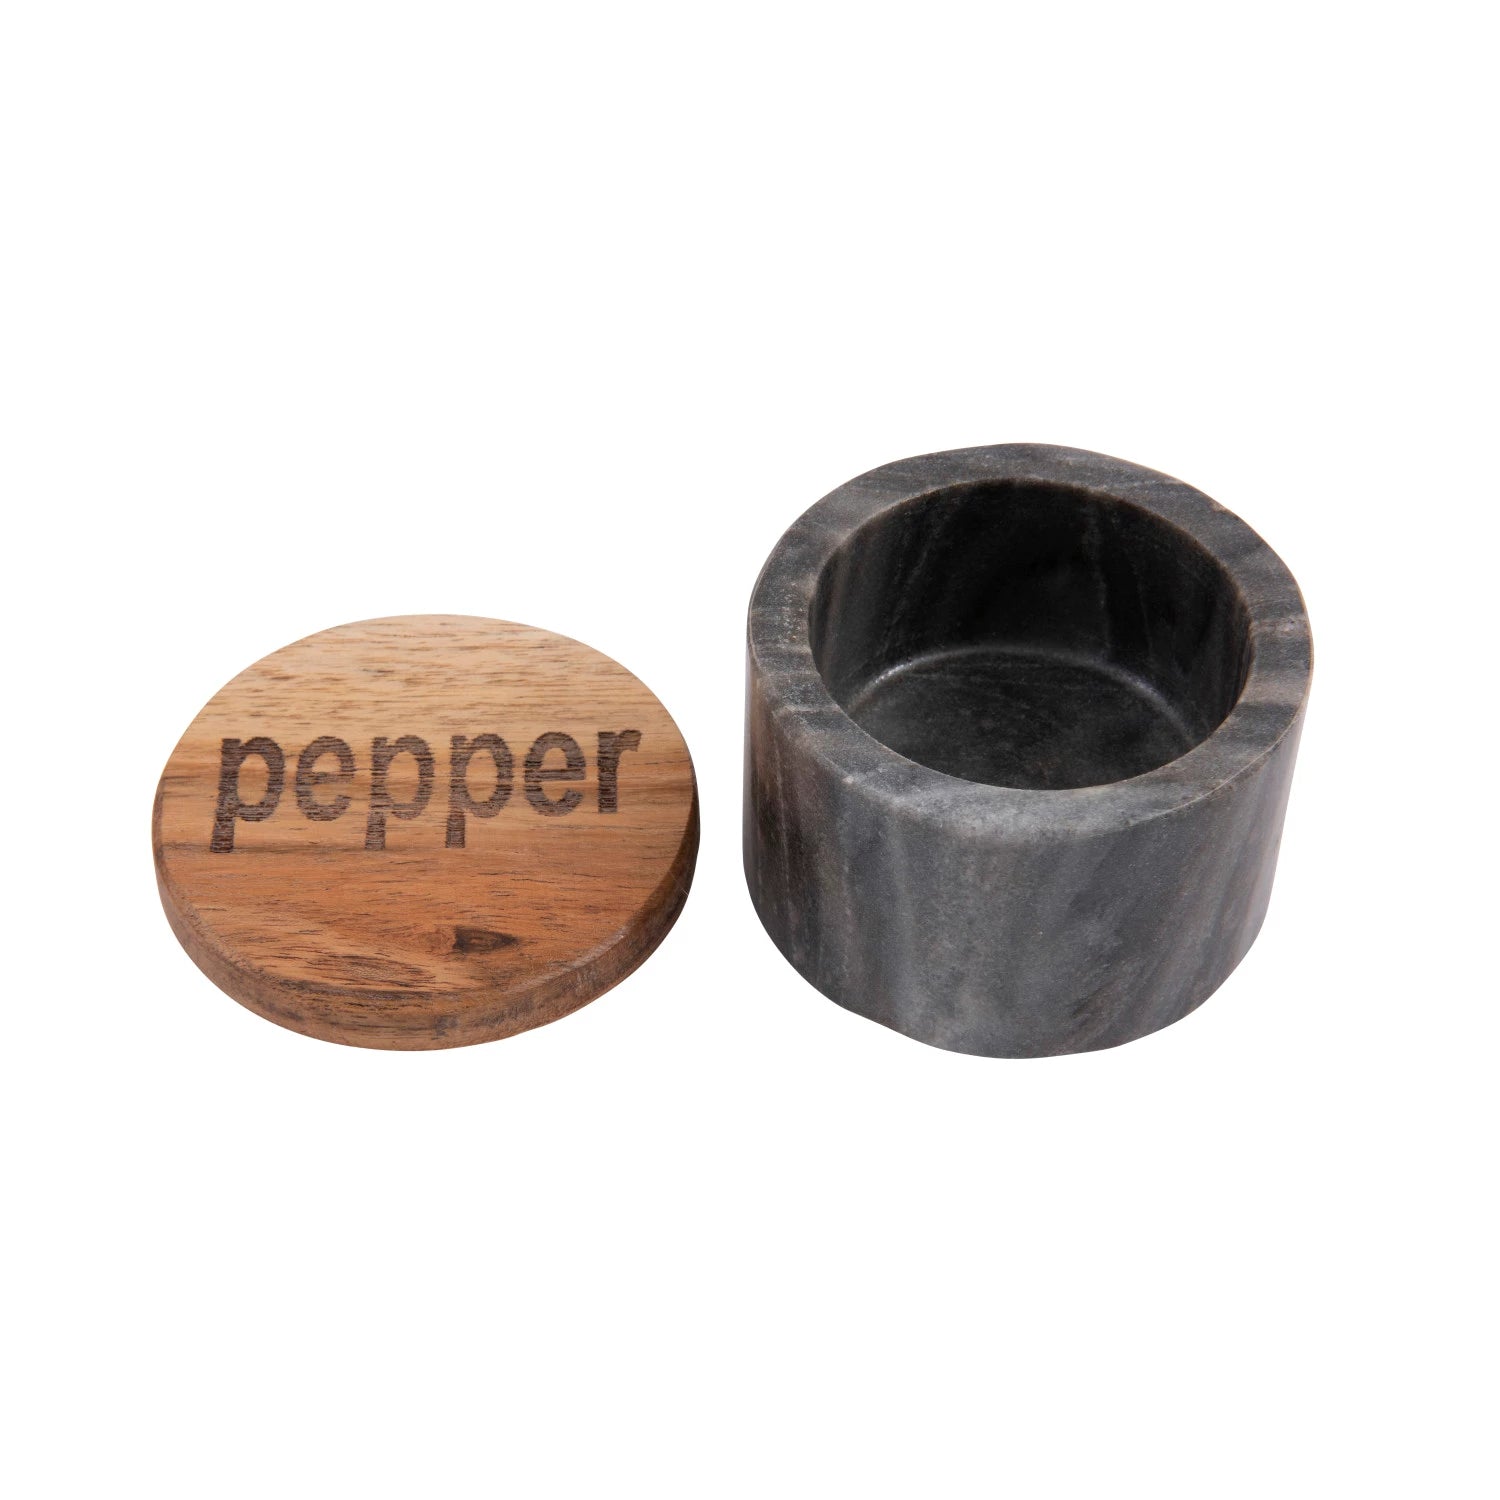 Salt and Pepper Container with Wood Lid, 2 Styles